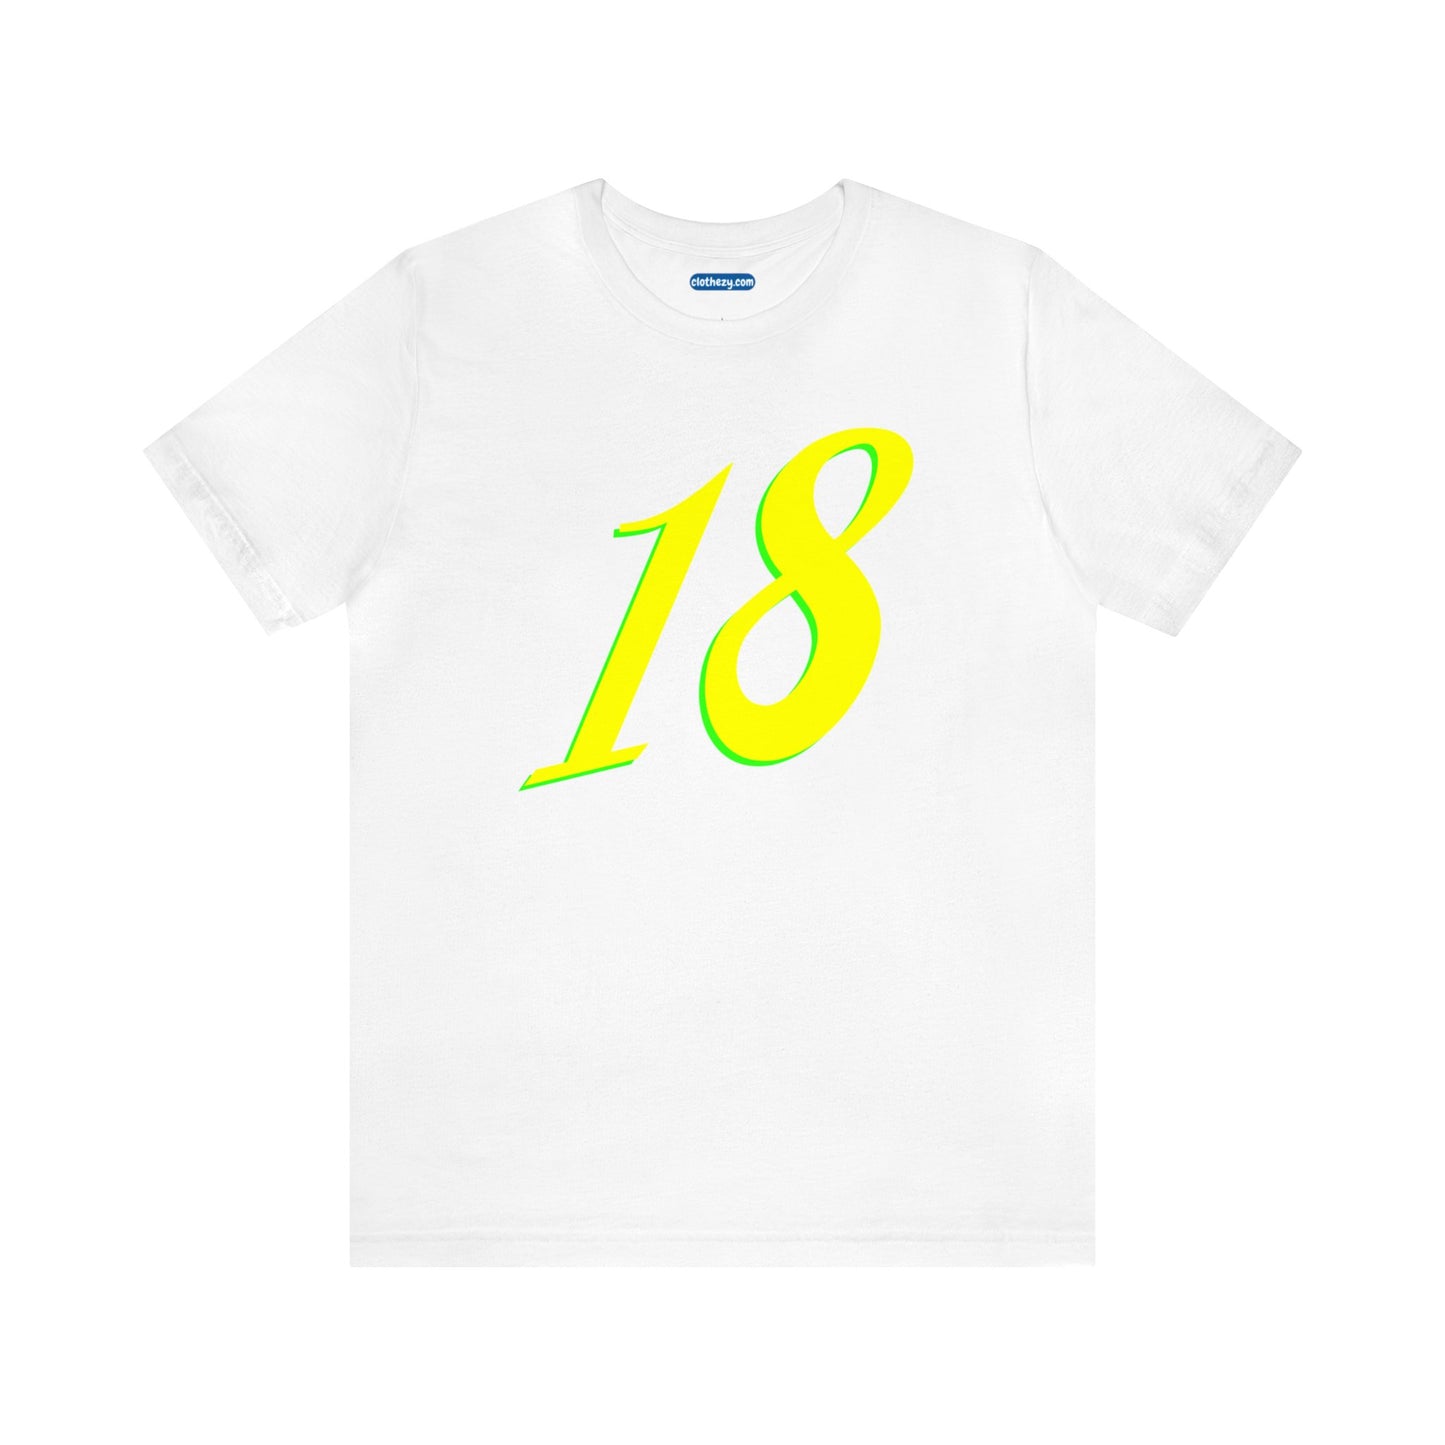 Number 18 Design - Soft Cotton Tee for birthdays and celebrations, Gift for friends and family, Multiple Options by clothezy.com in White Size Small - Buy Now